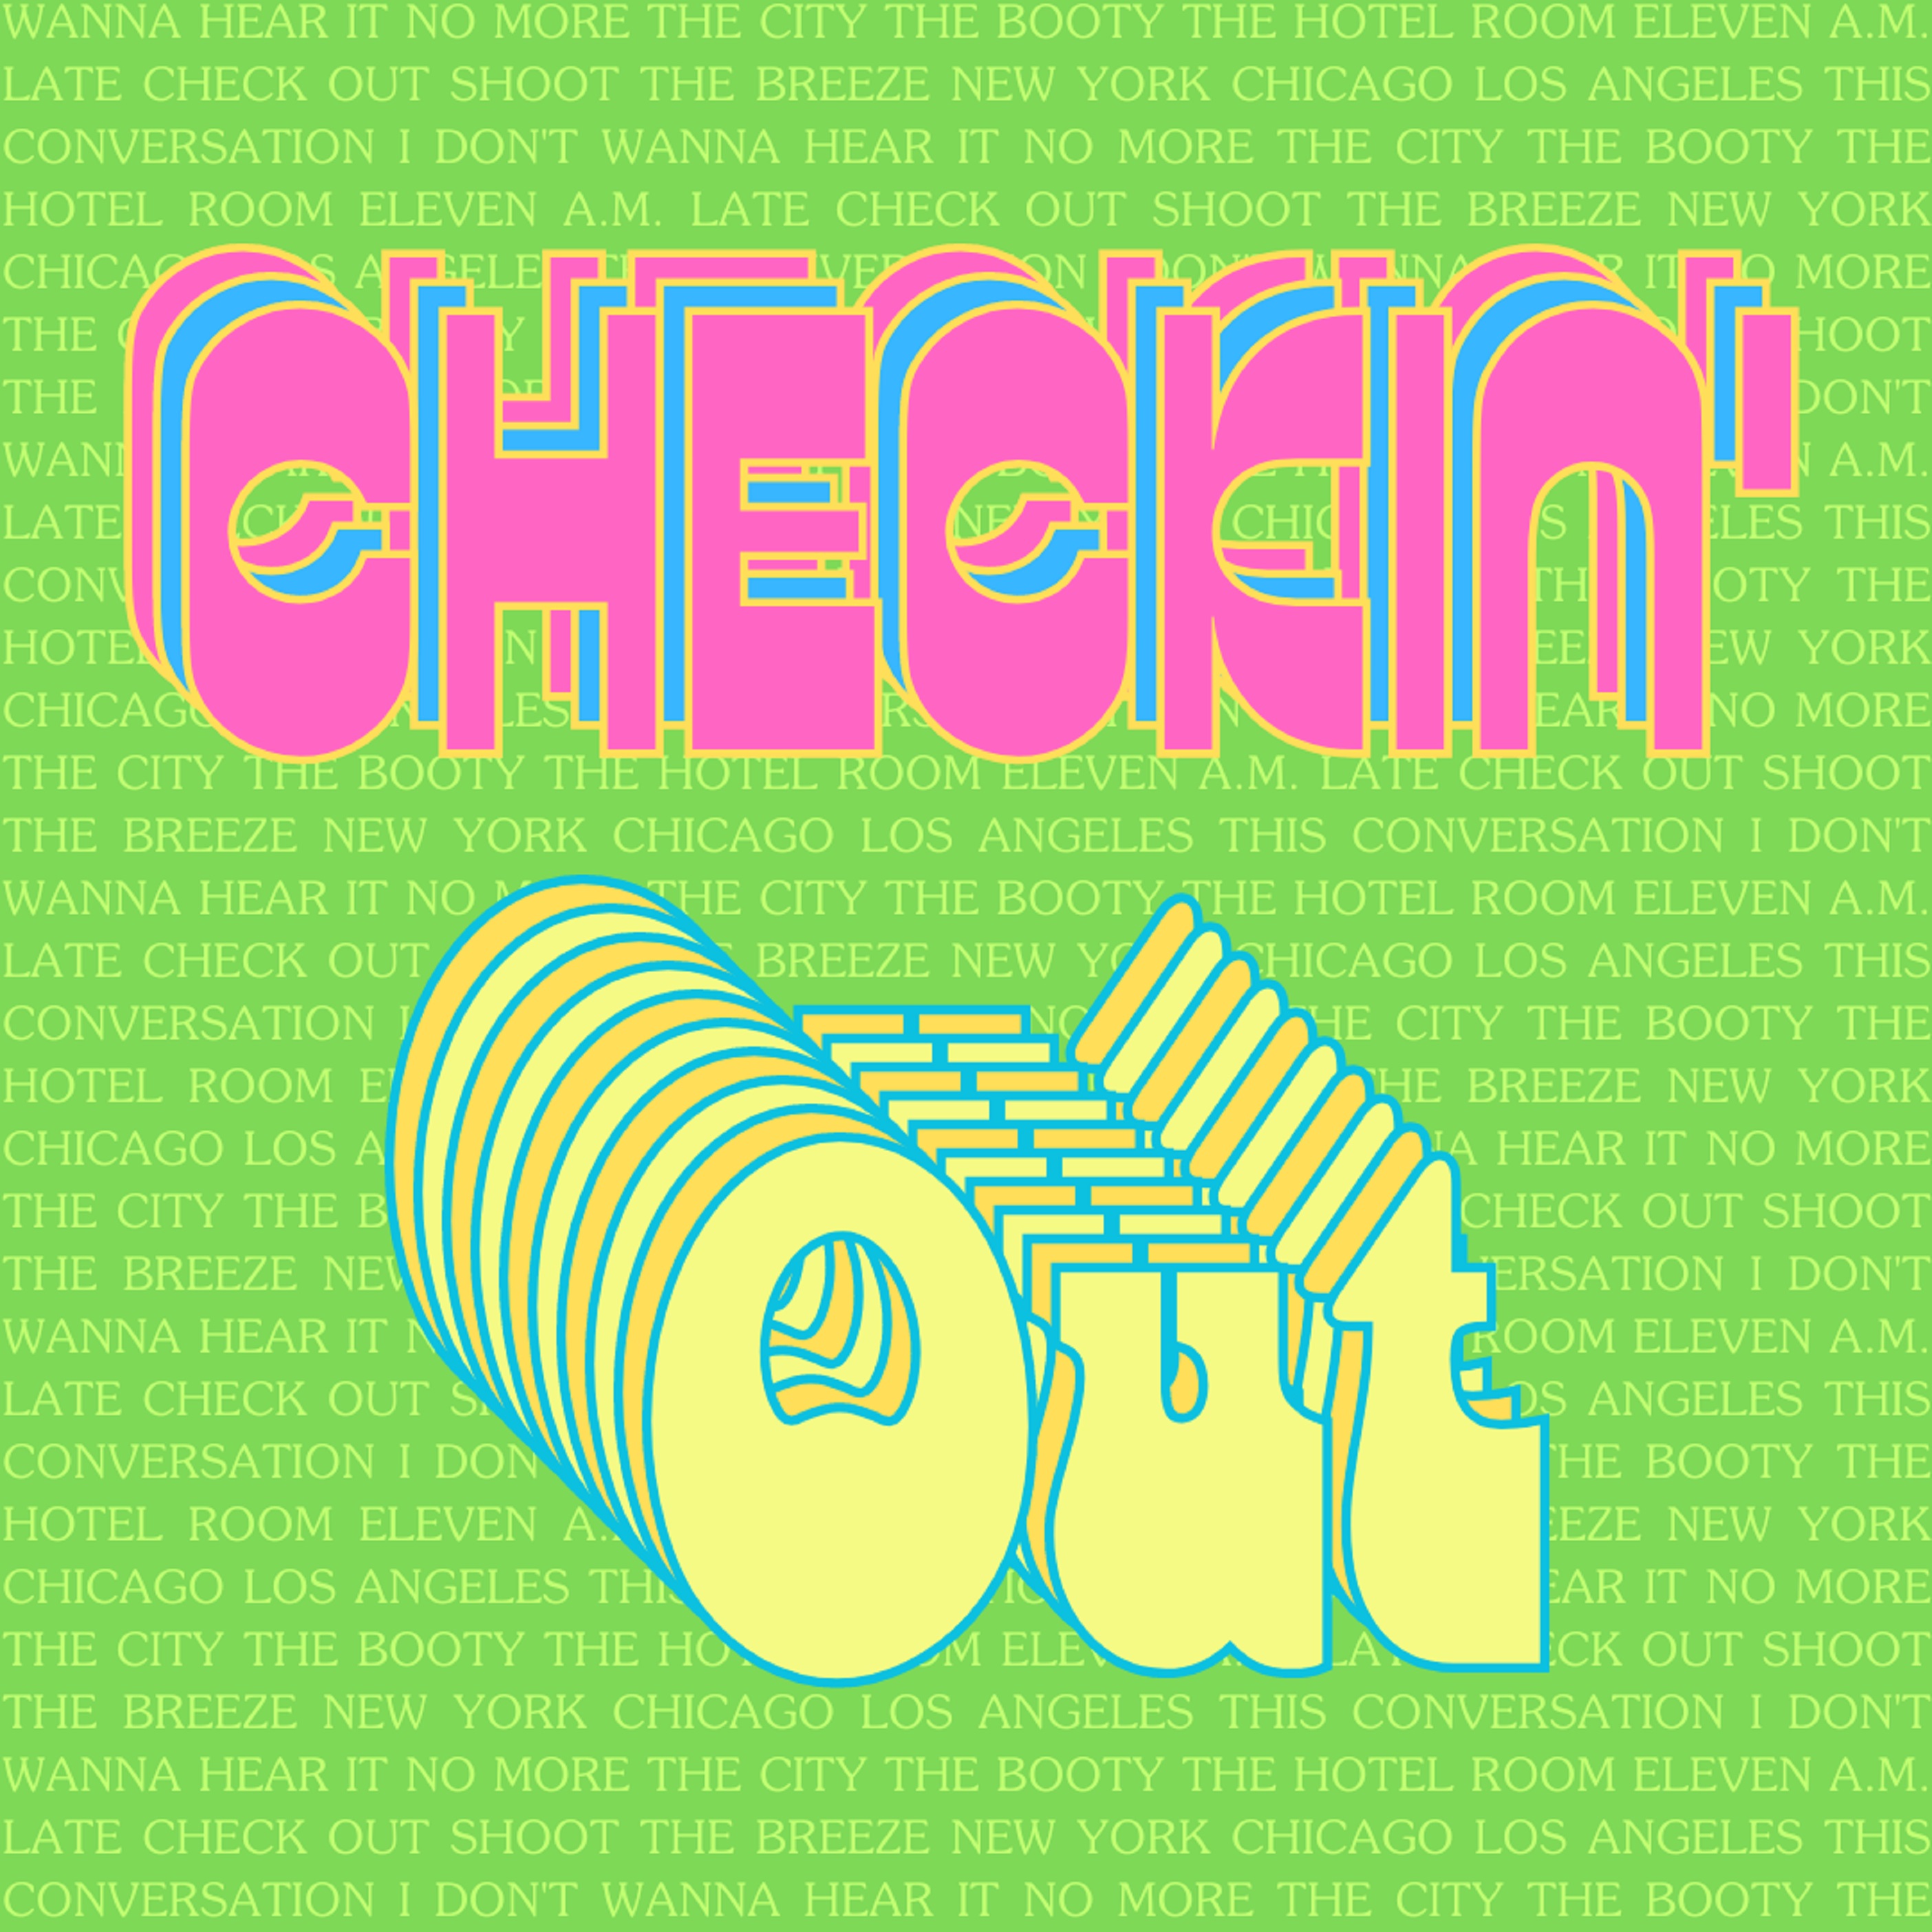 Kendall Street Company Set to Drop Funky New Single "Checkin’ Out"